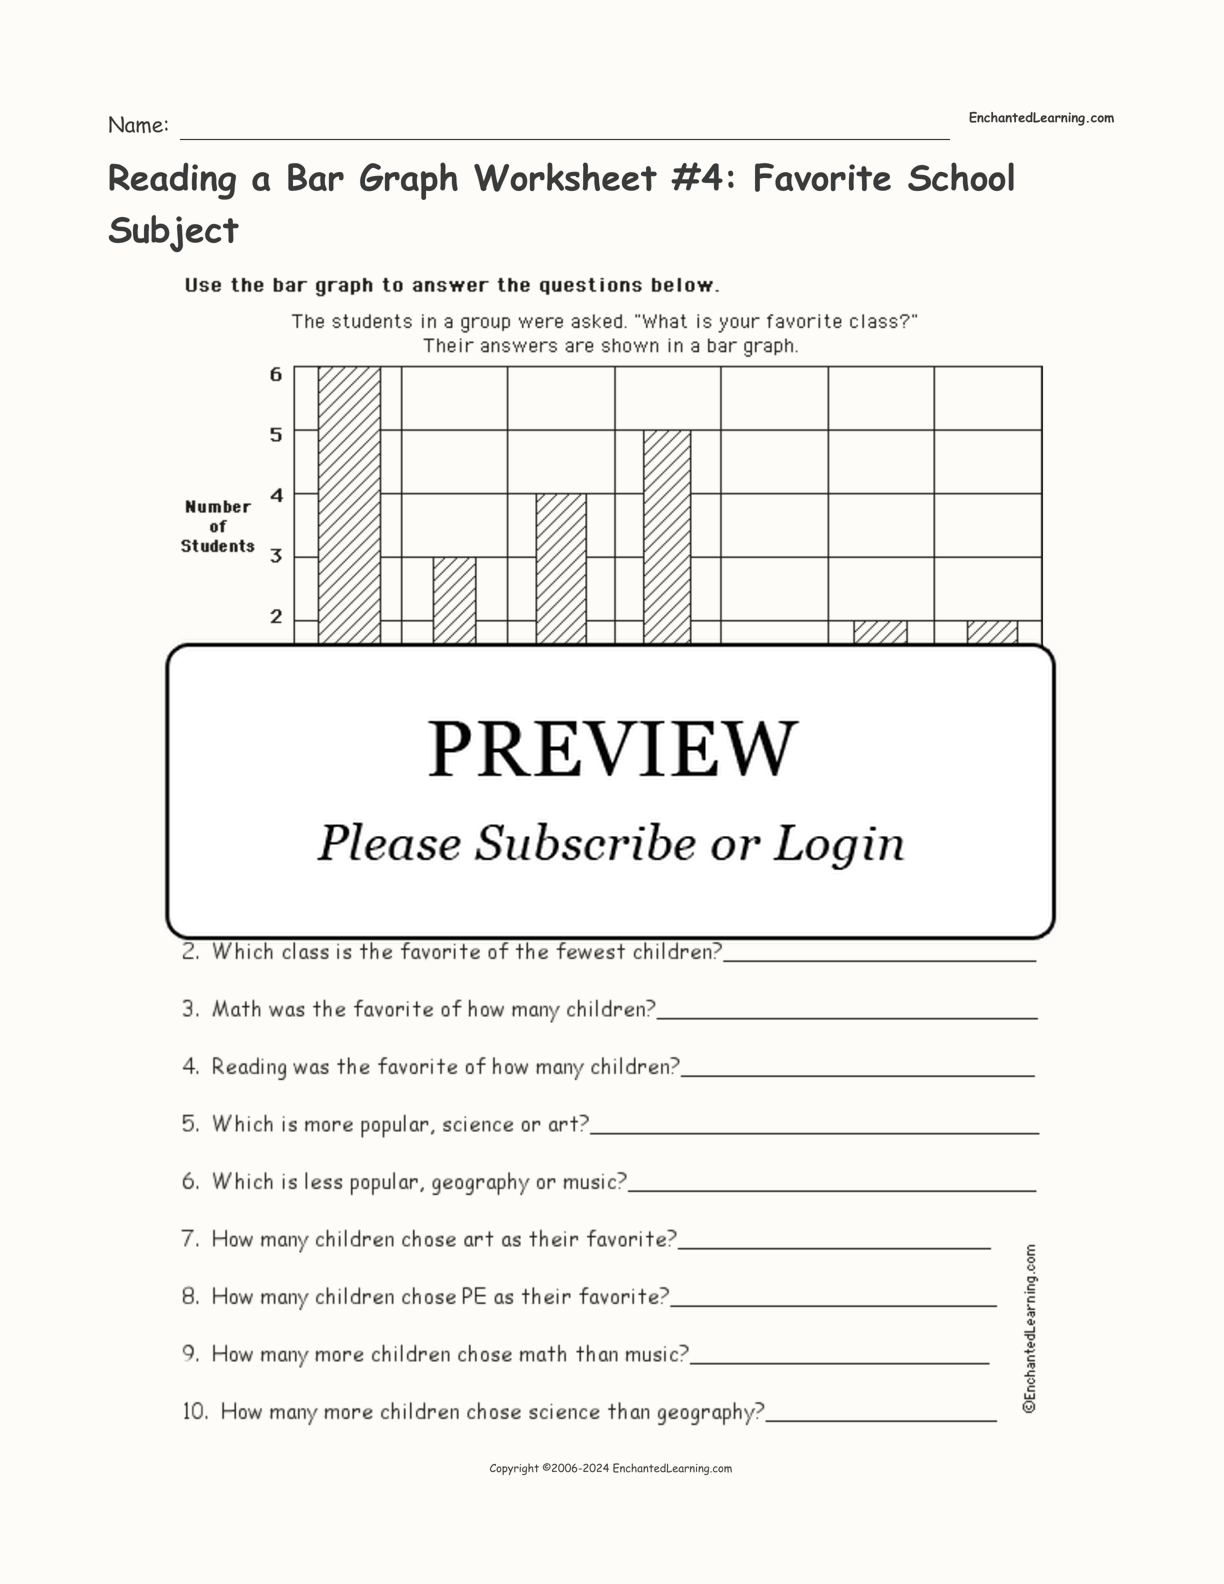 Reading a Bar Graph Worksheet #4: Favorite School Subject interactive worksheet page 1